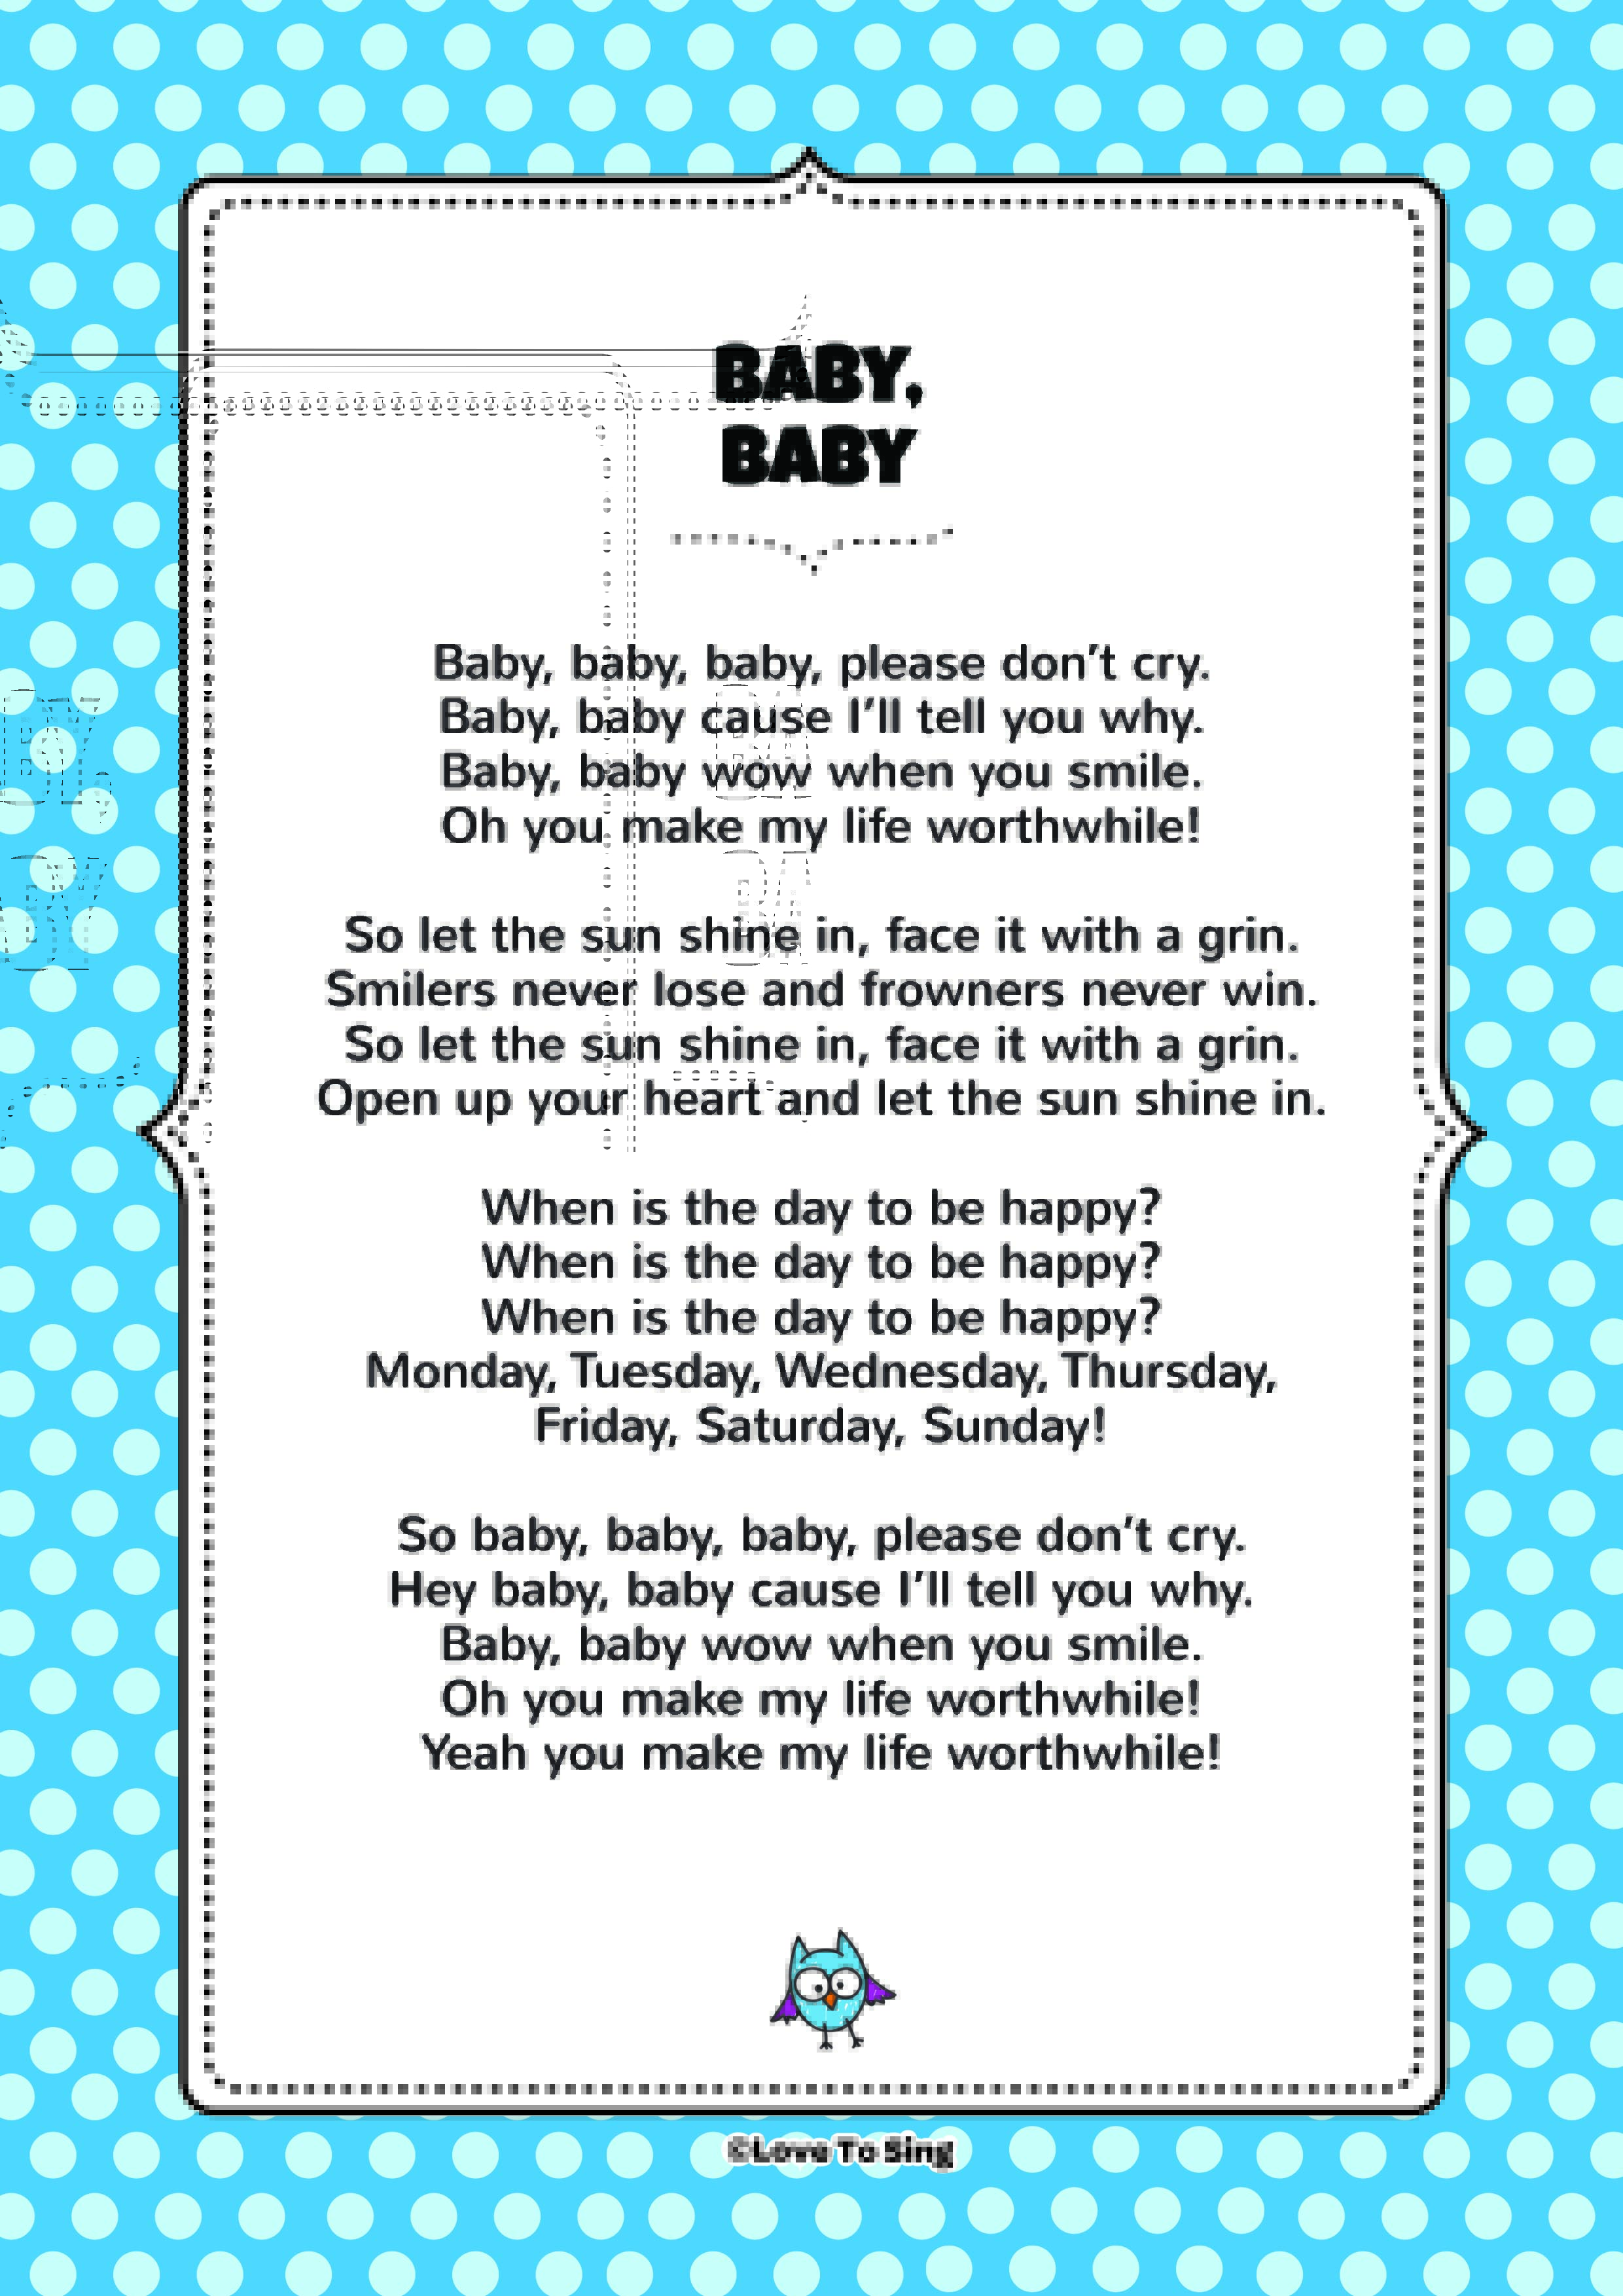 Baby Song | FREE Video Song, Lyrics & Activities